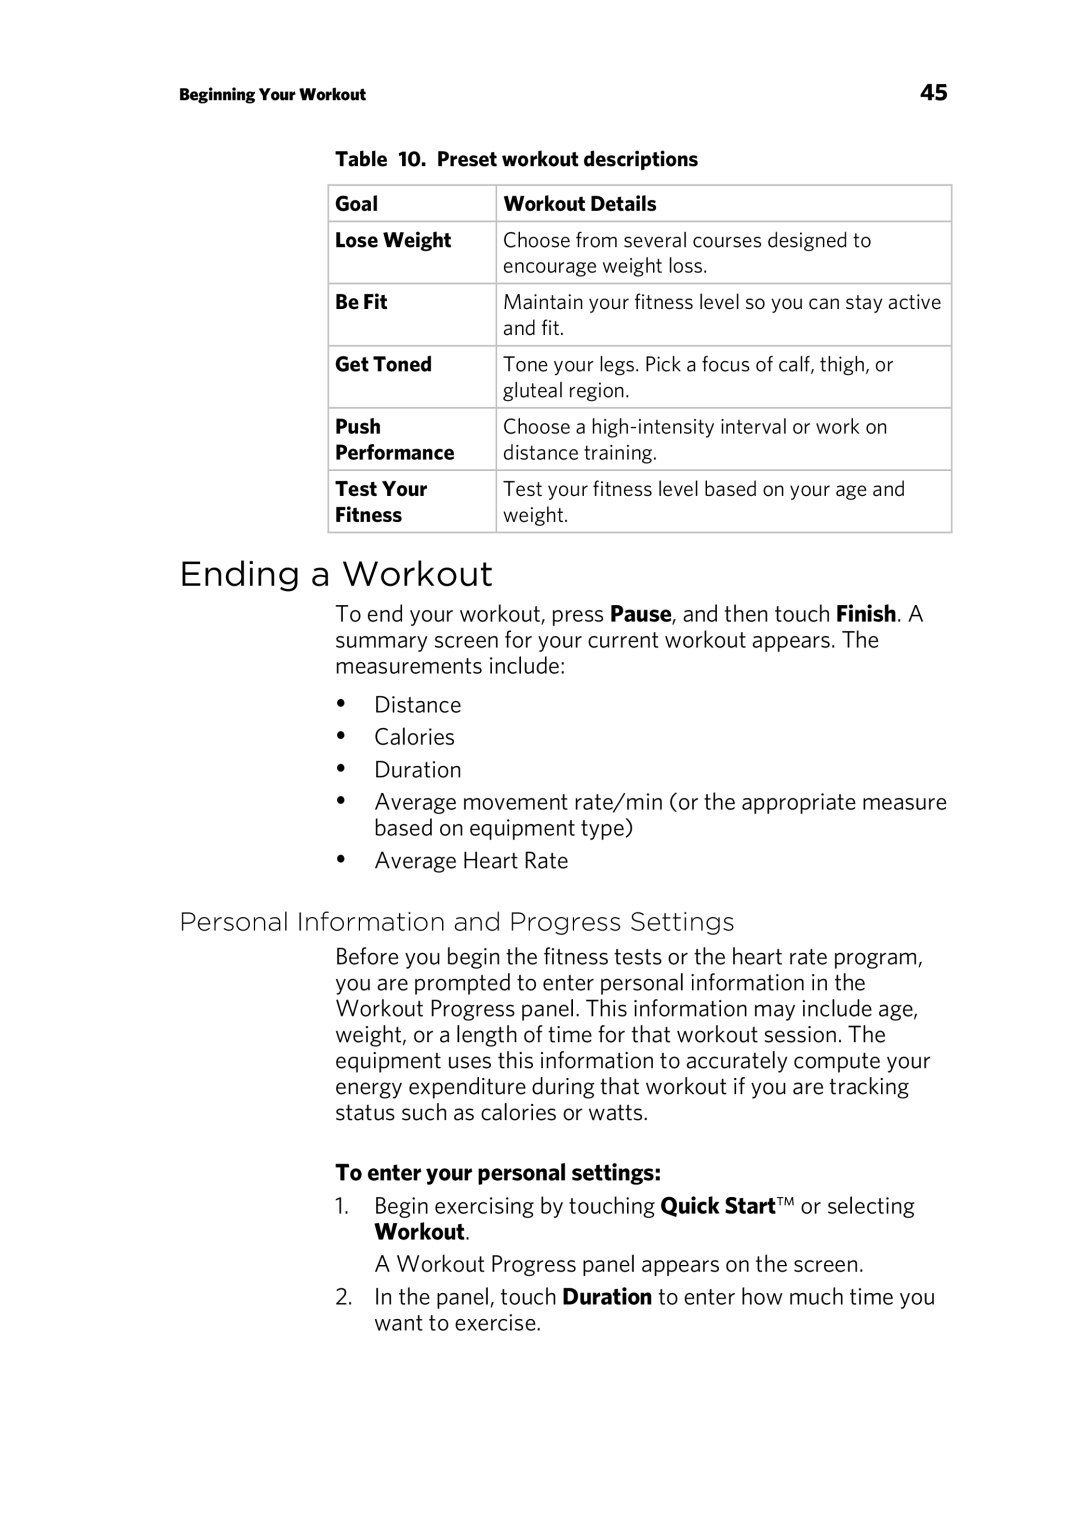 Precor P80 manual Ending a Workout, Personal Information and Progress Settings, To enter your personal settings 